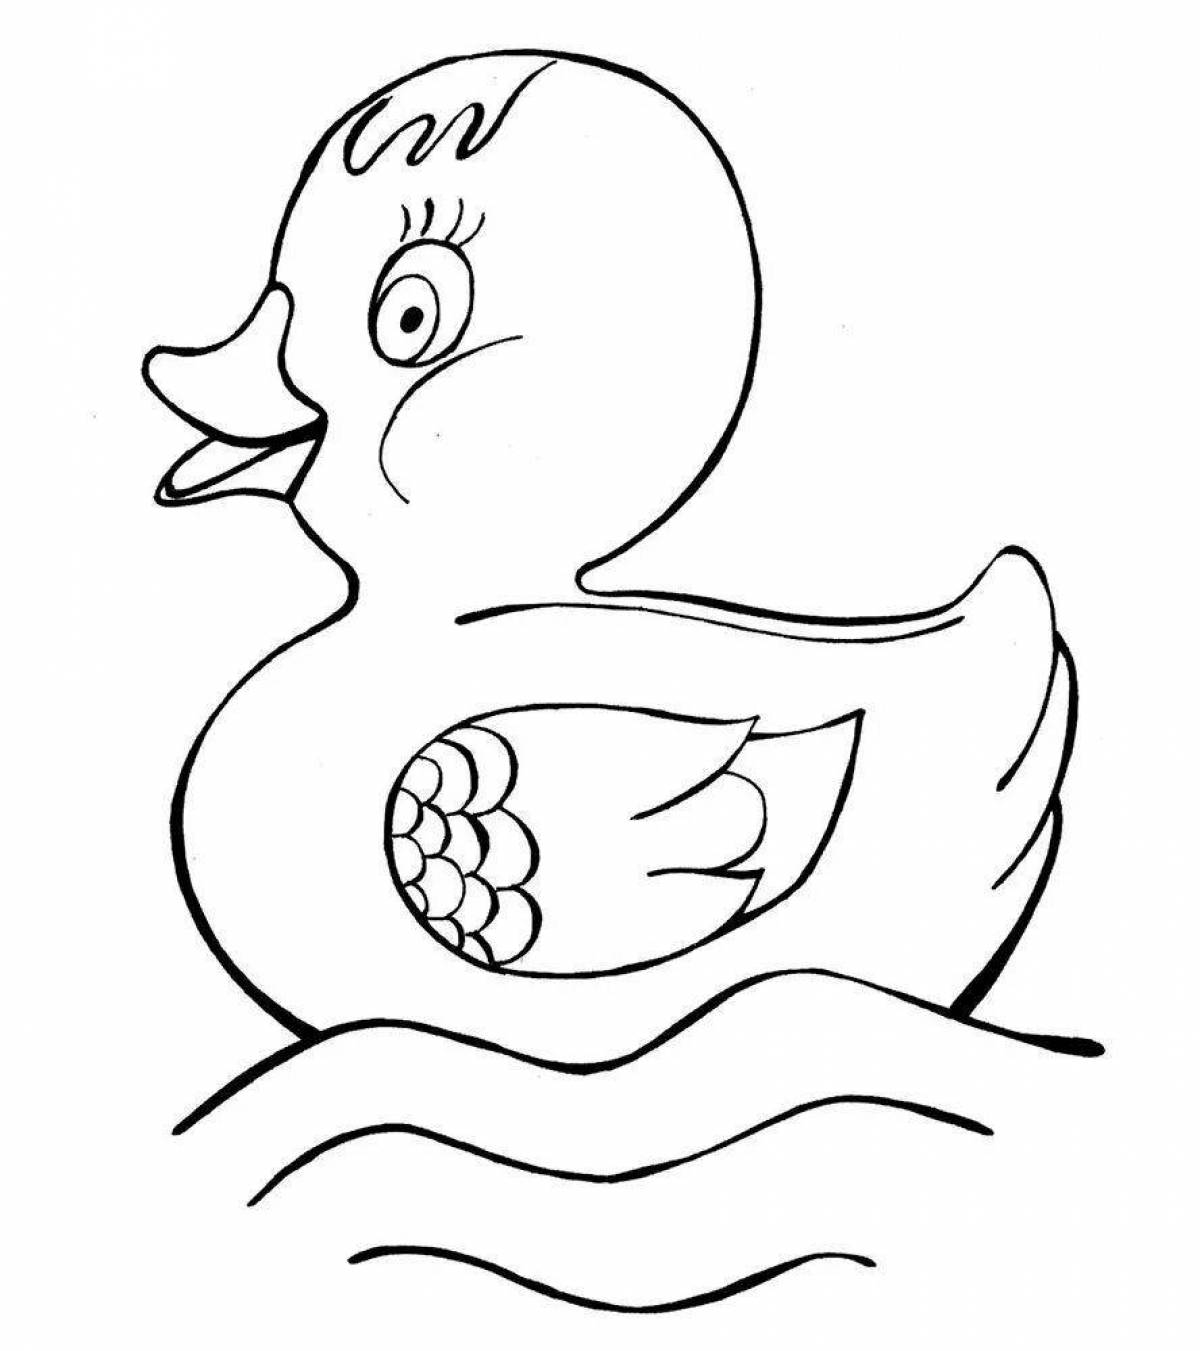 Sunny duck coloring book for kids